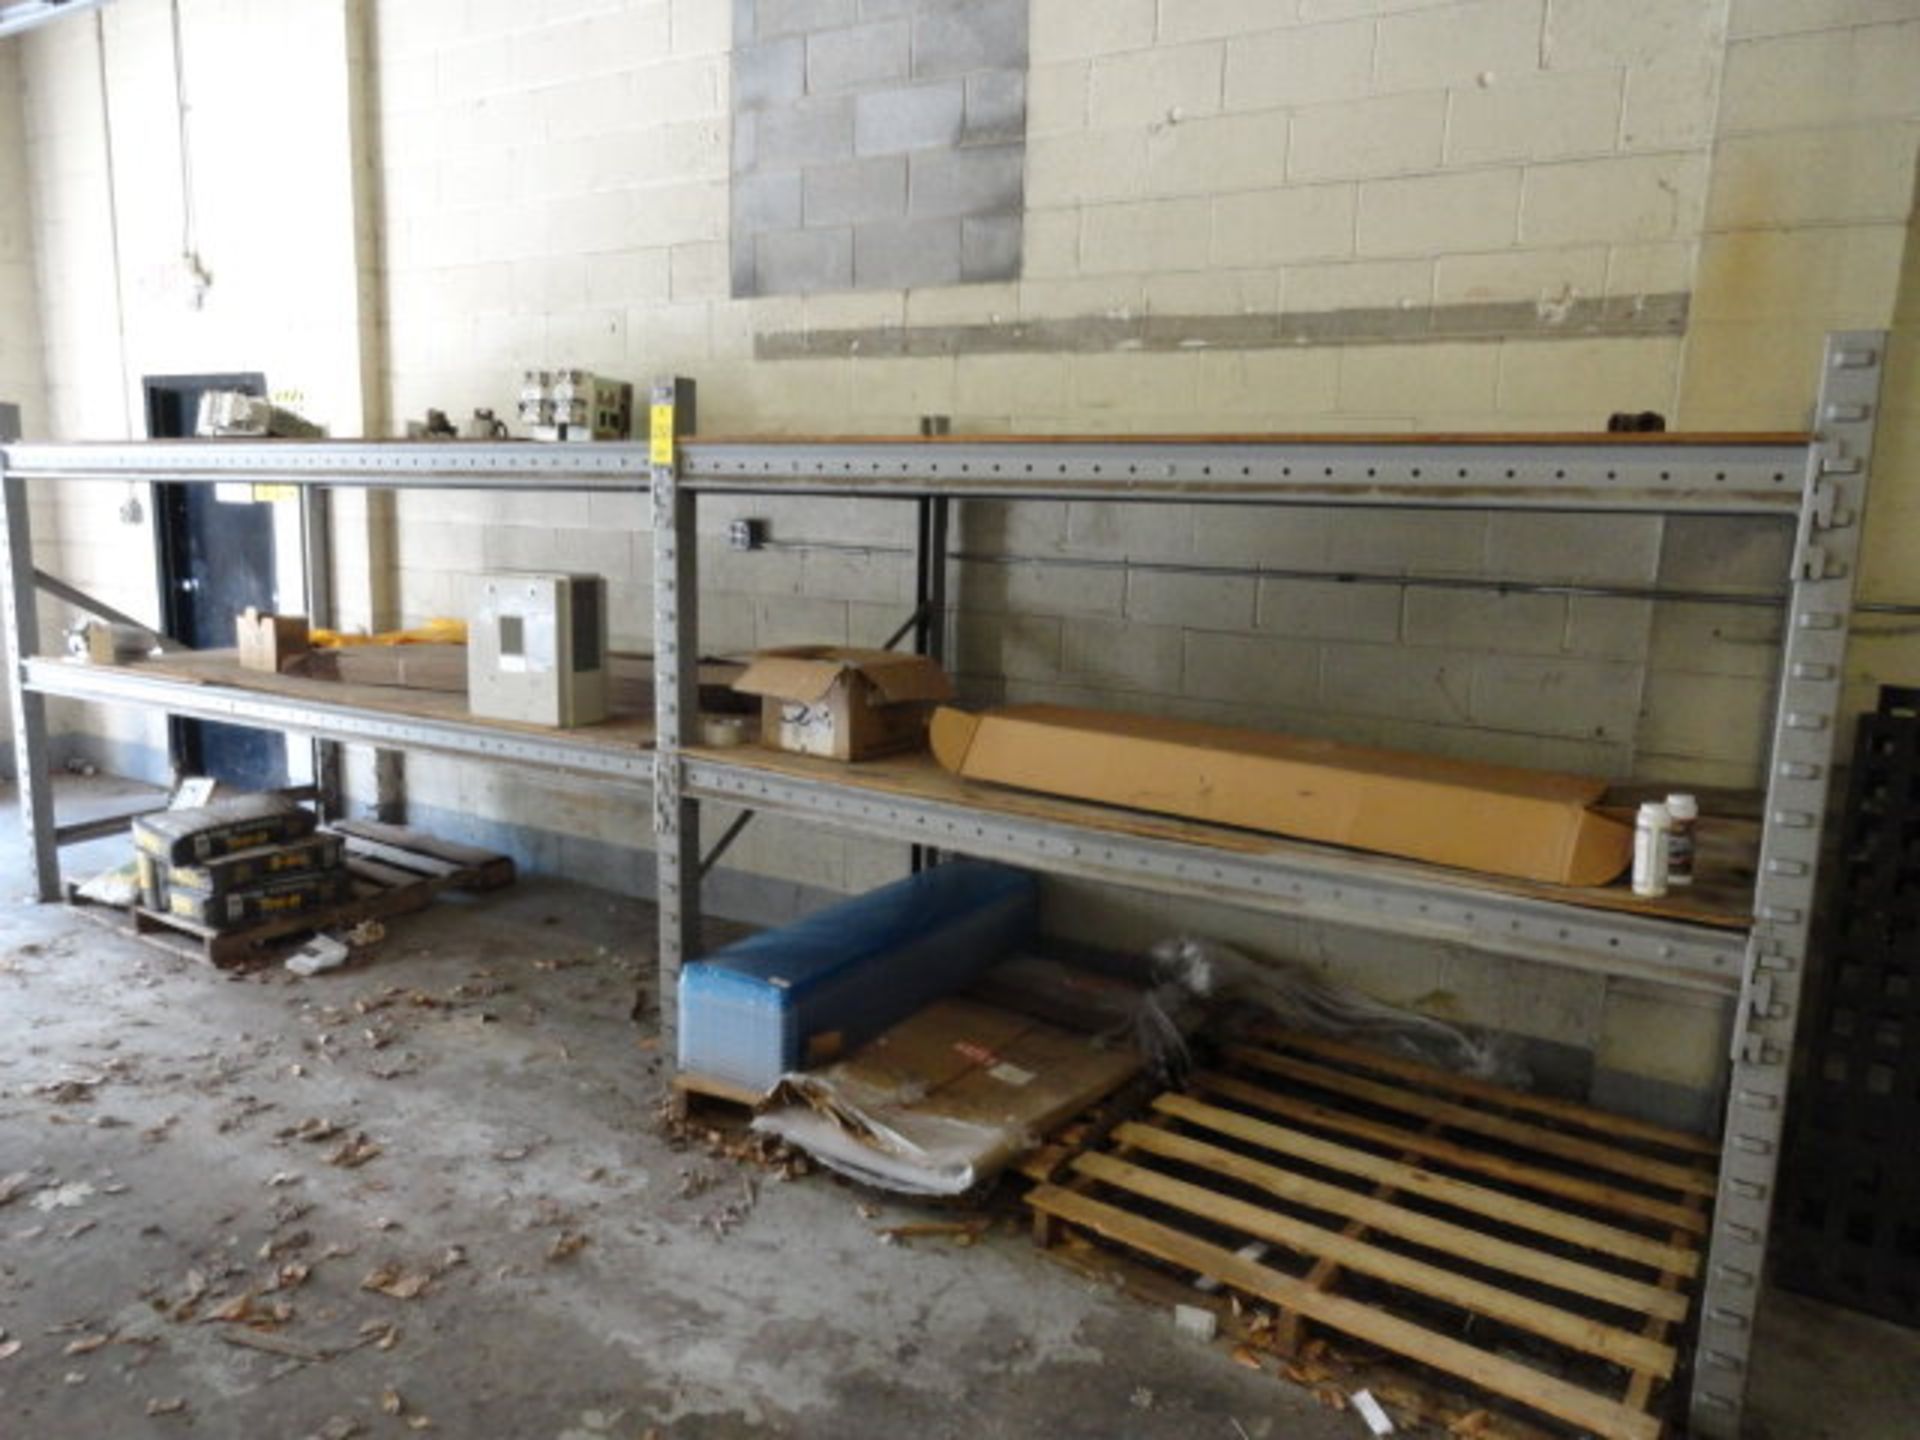 (2) Sections of Racking: Contents & Racking 8' sections, Stainless Steel Table, all located in